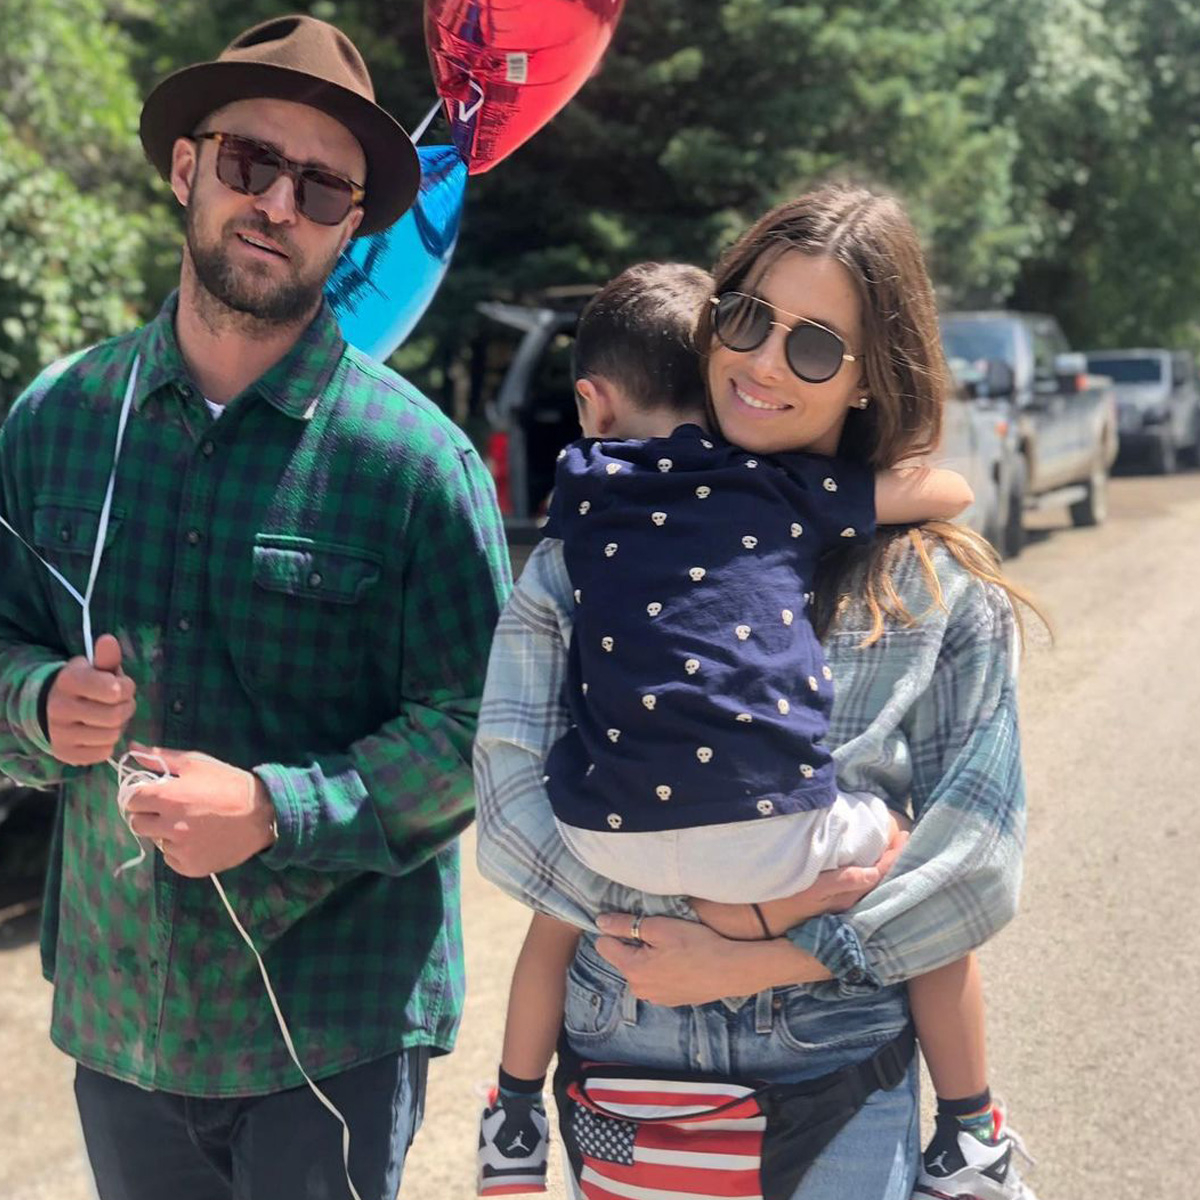 All About Justin Timberlake and Jessica Biel's 2 Kids